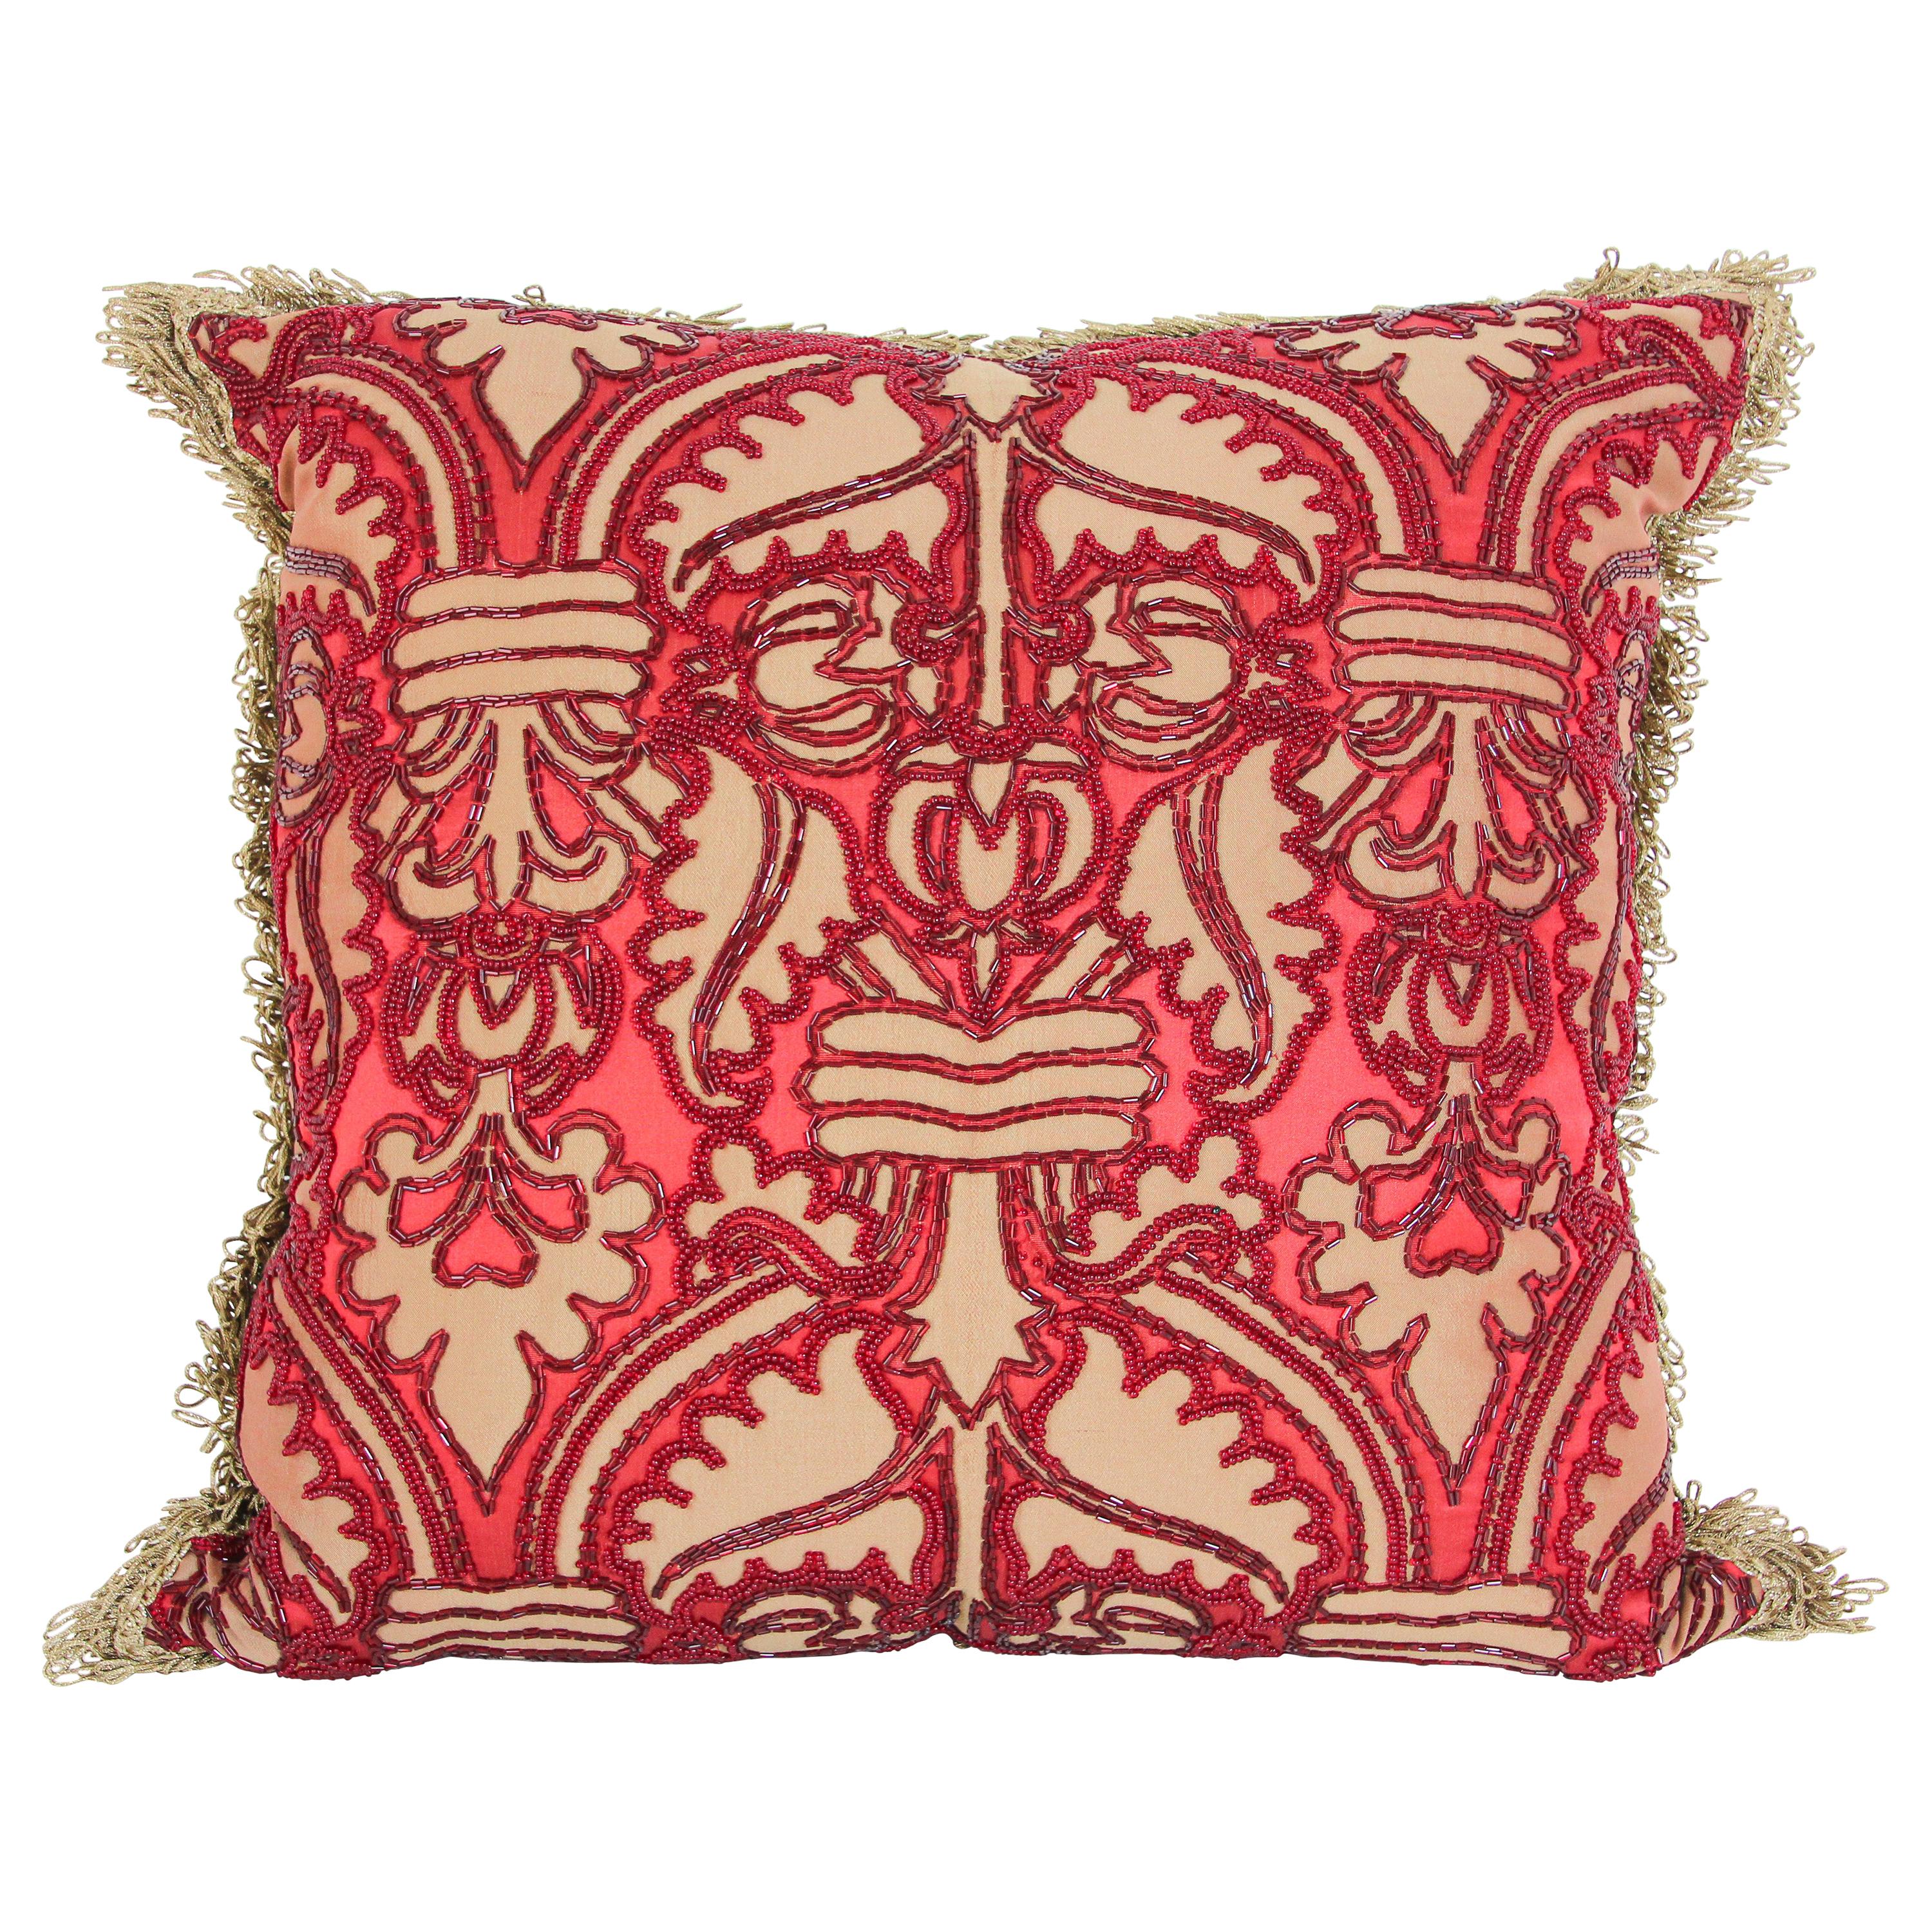 Large Silk Pillow with Metallic Red Beads